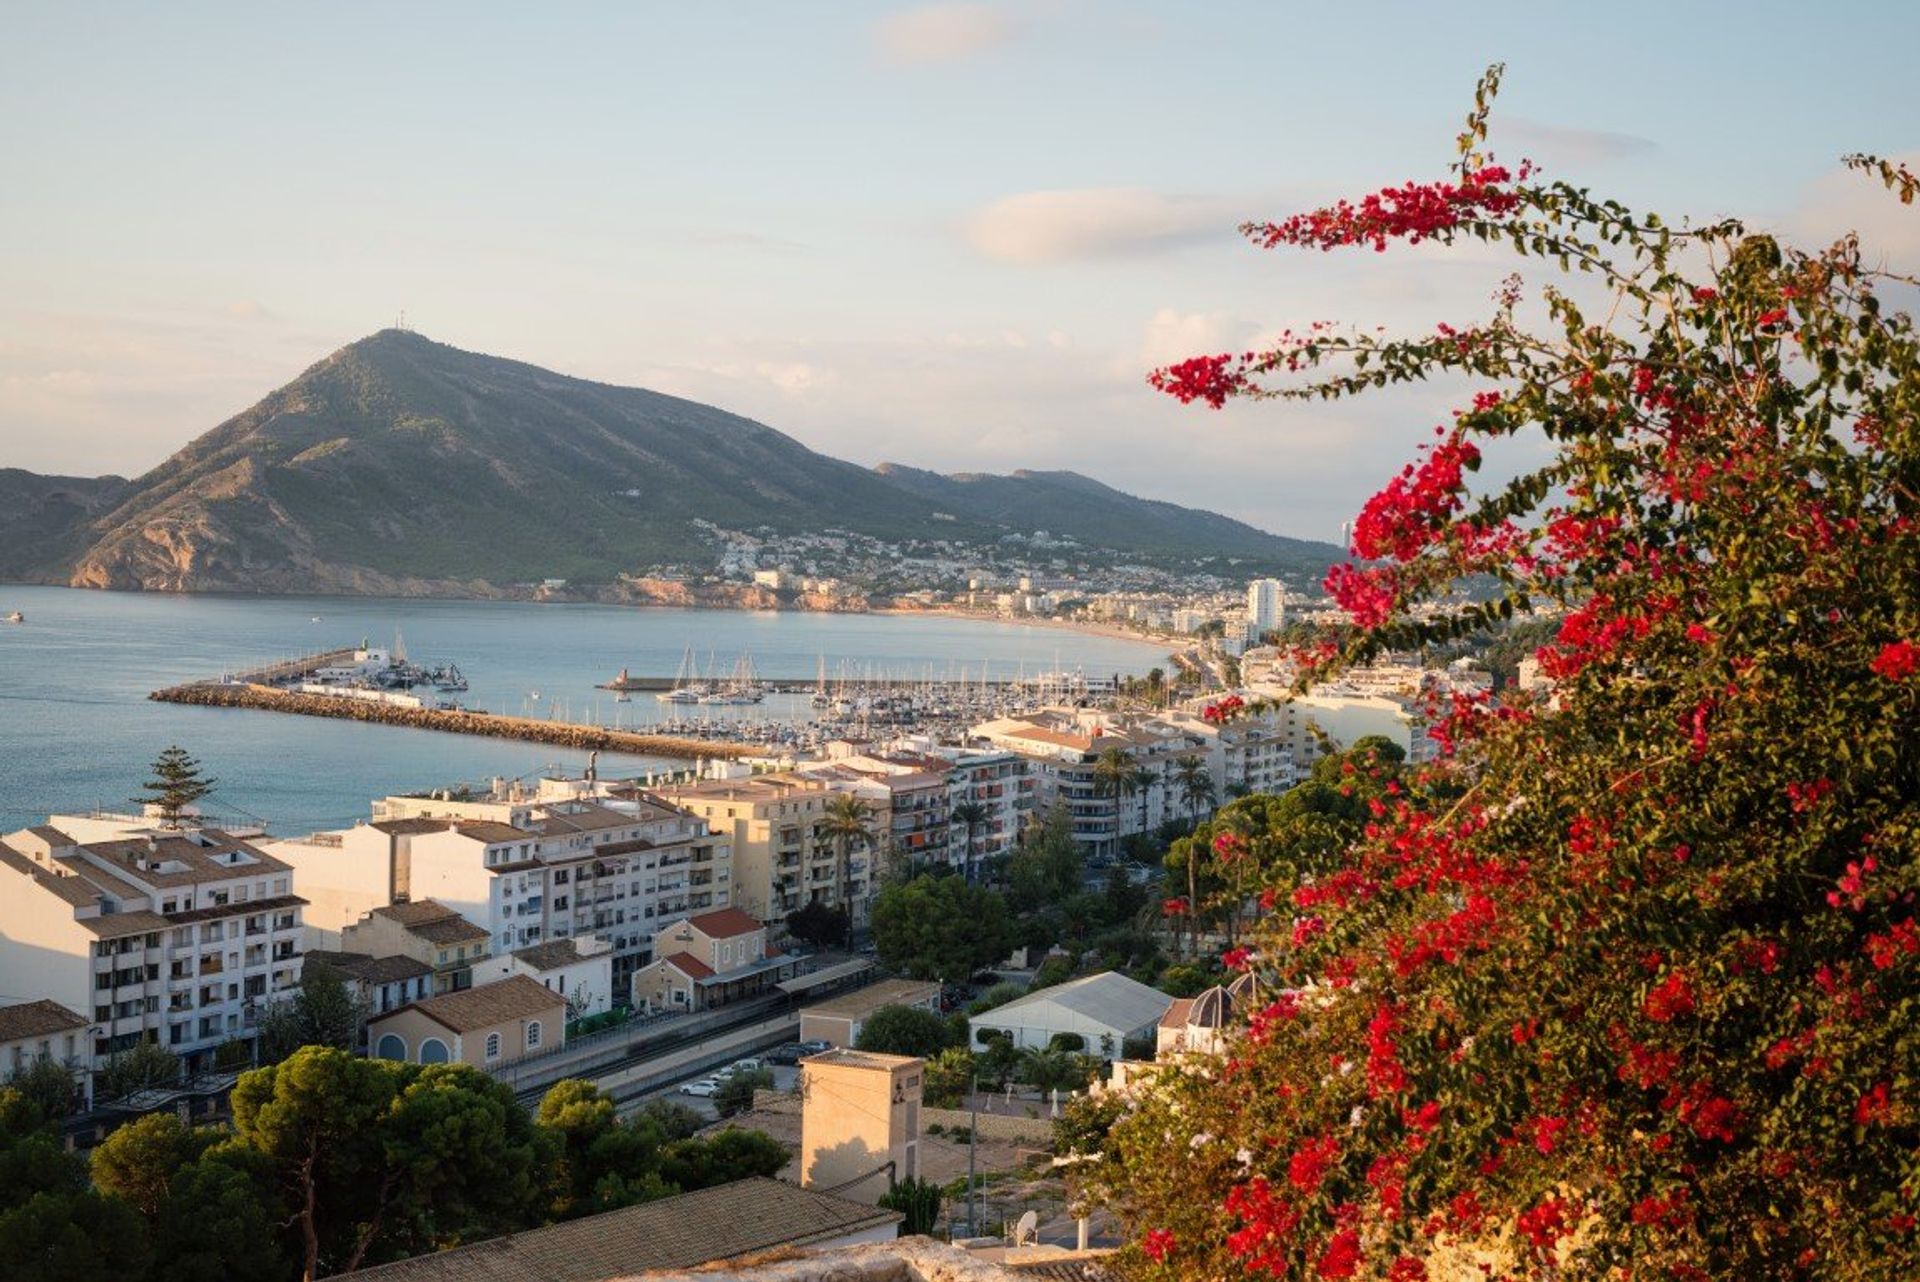 Revel in the authentic atmosphere of a typically Spanish resort